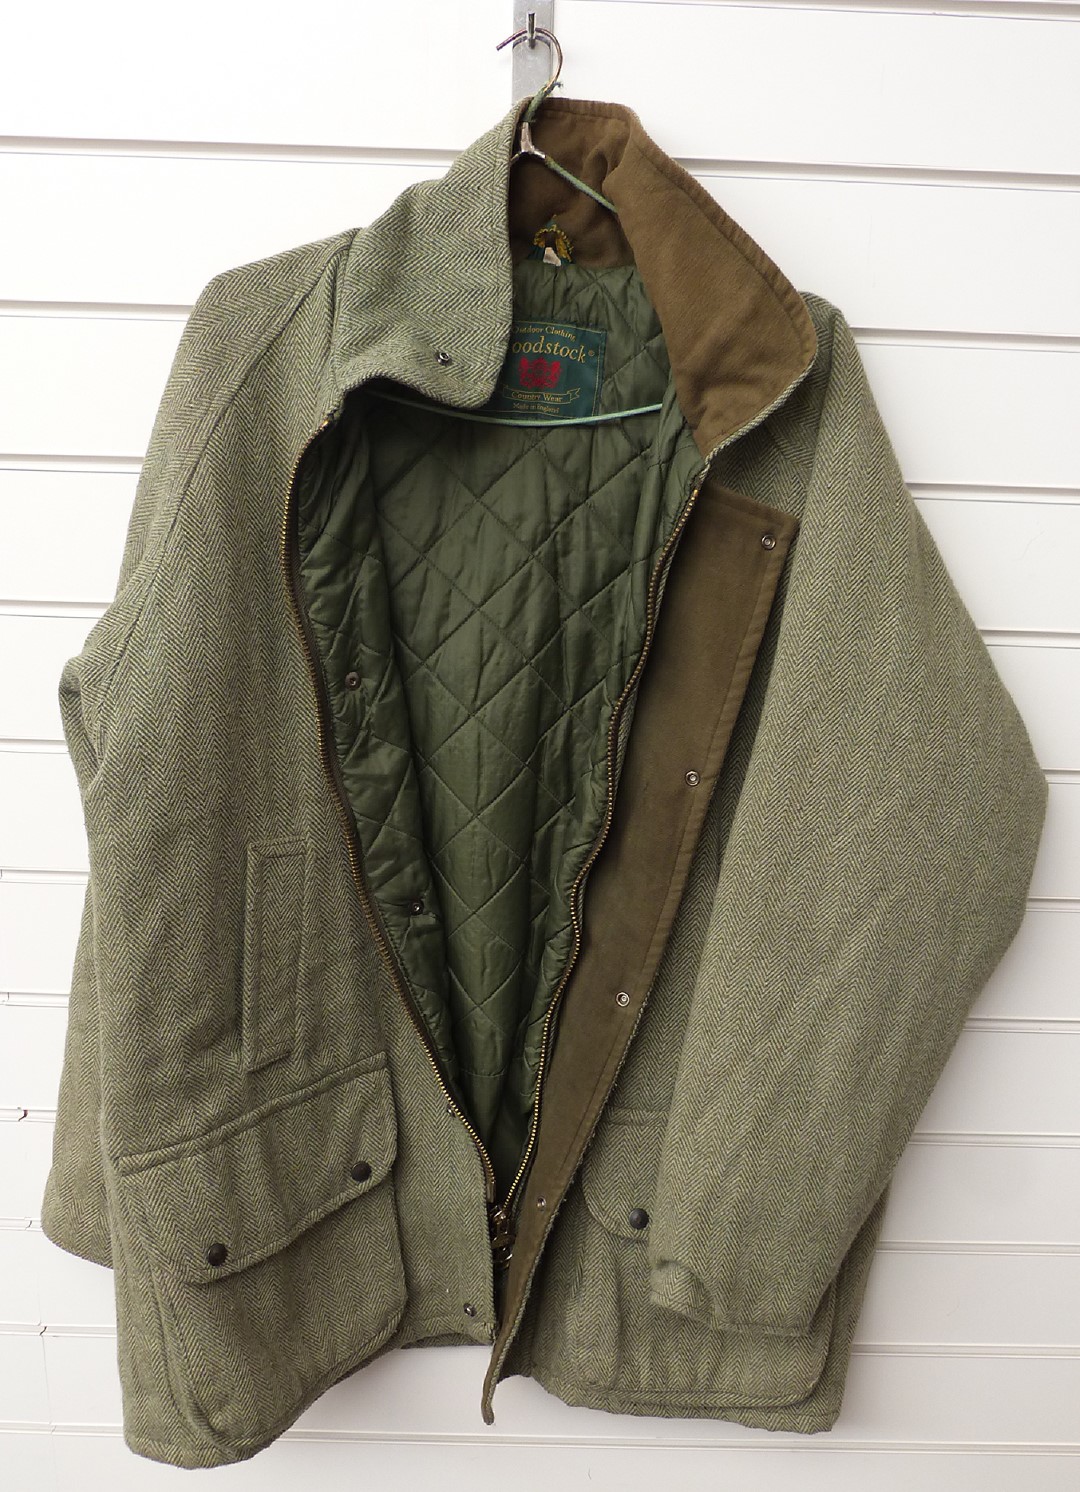 Woodstock Country Wear gentleman's tweed field coat (size XL) and two pairs of tweed breeks, size - Image 2 of 6